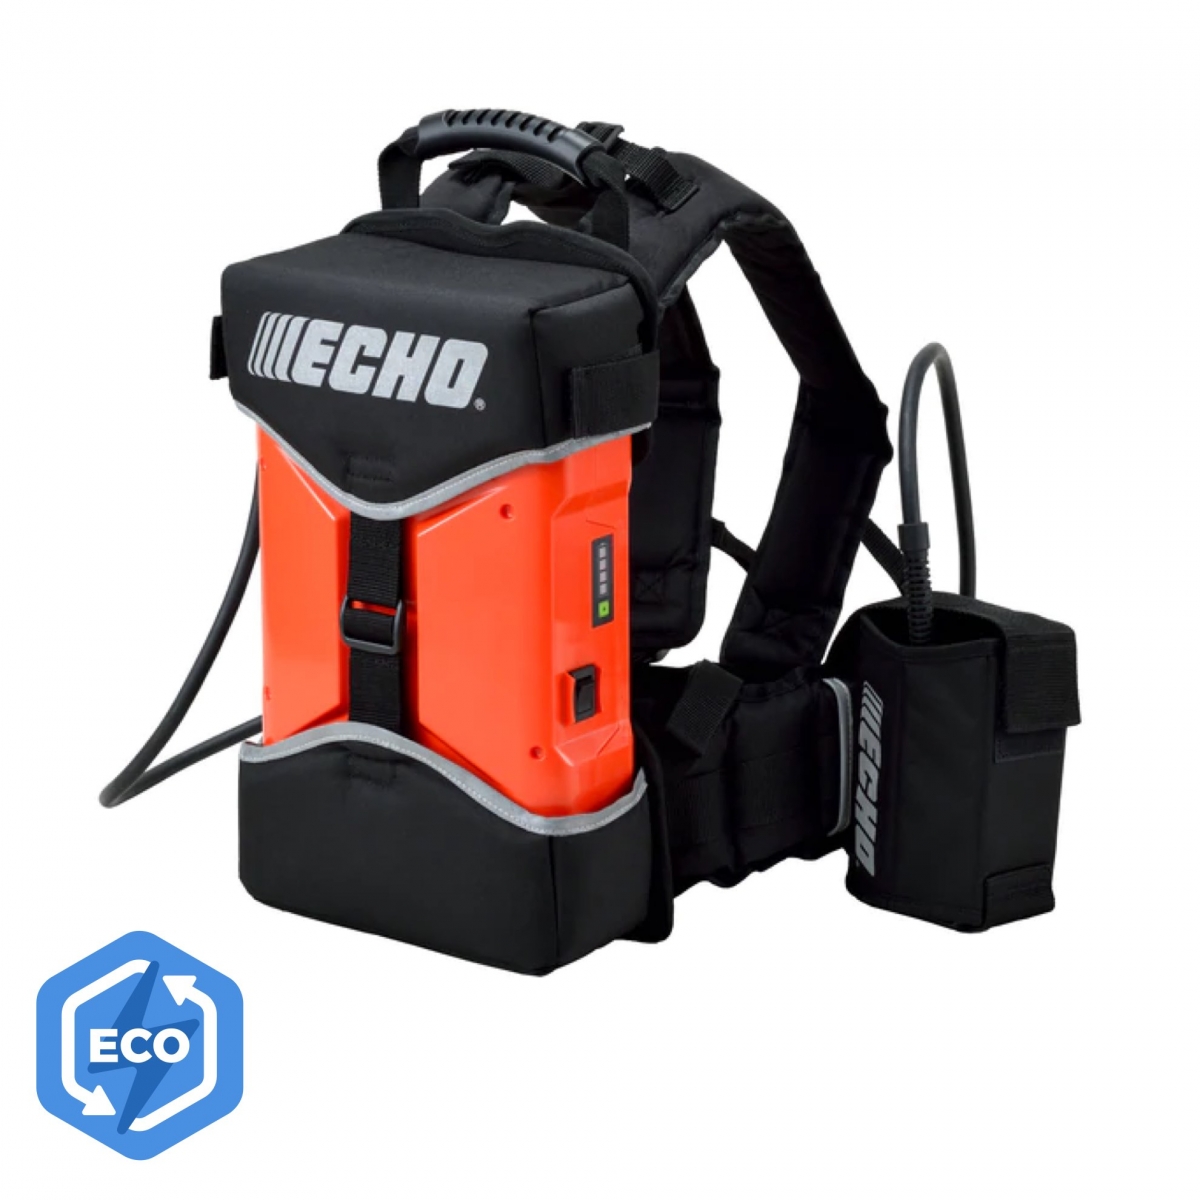 ECHO LBP-560-900 Backpack and Battery